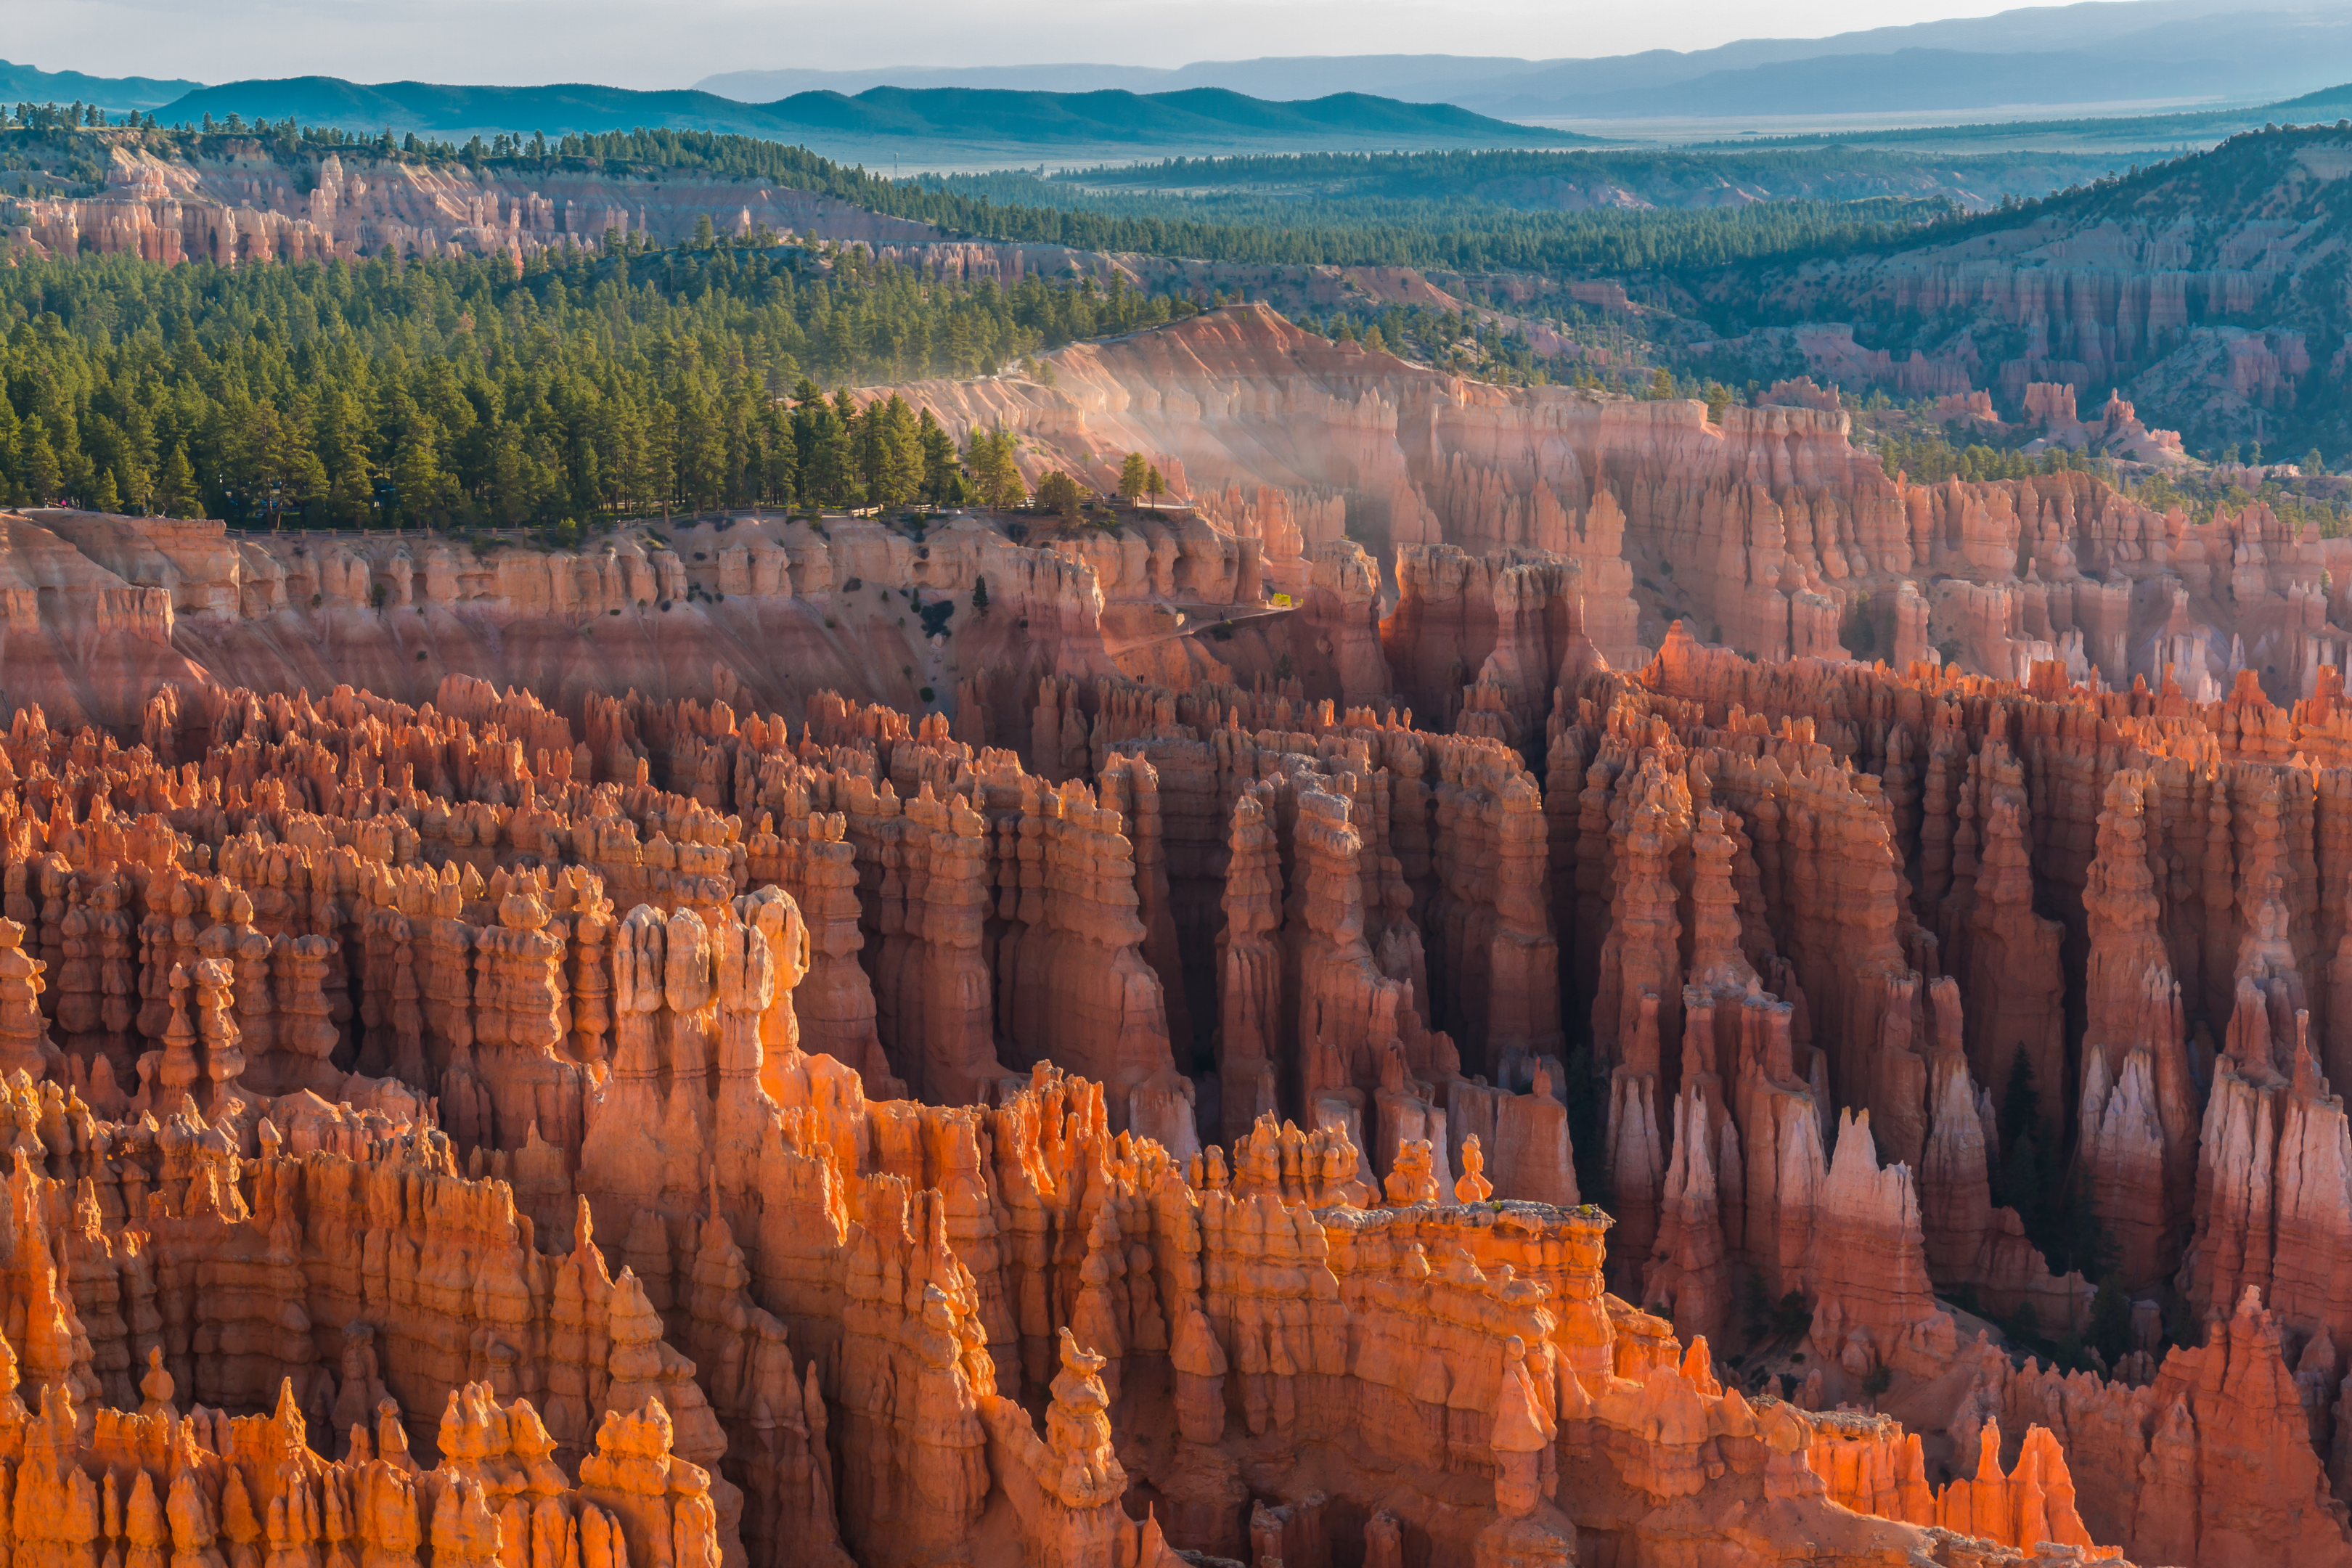 Hoodoos of Silent City From Inspiration Point, Bryce Canyon National Park, Utah